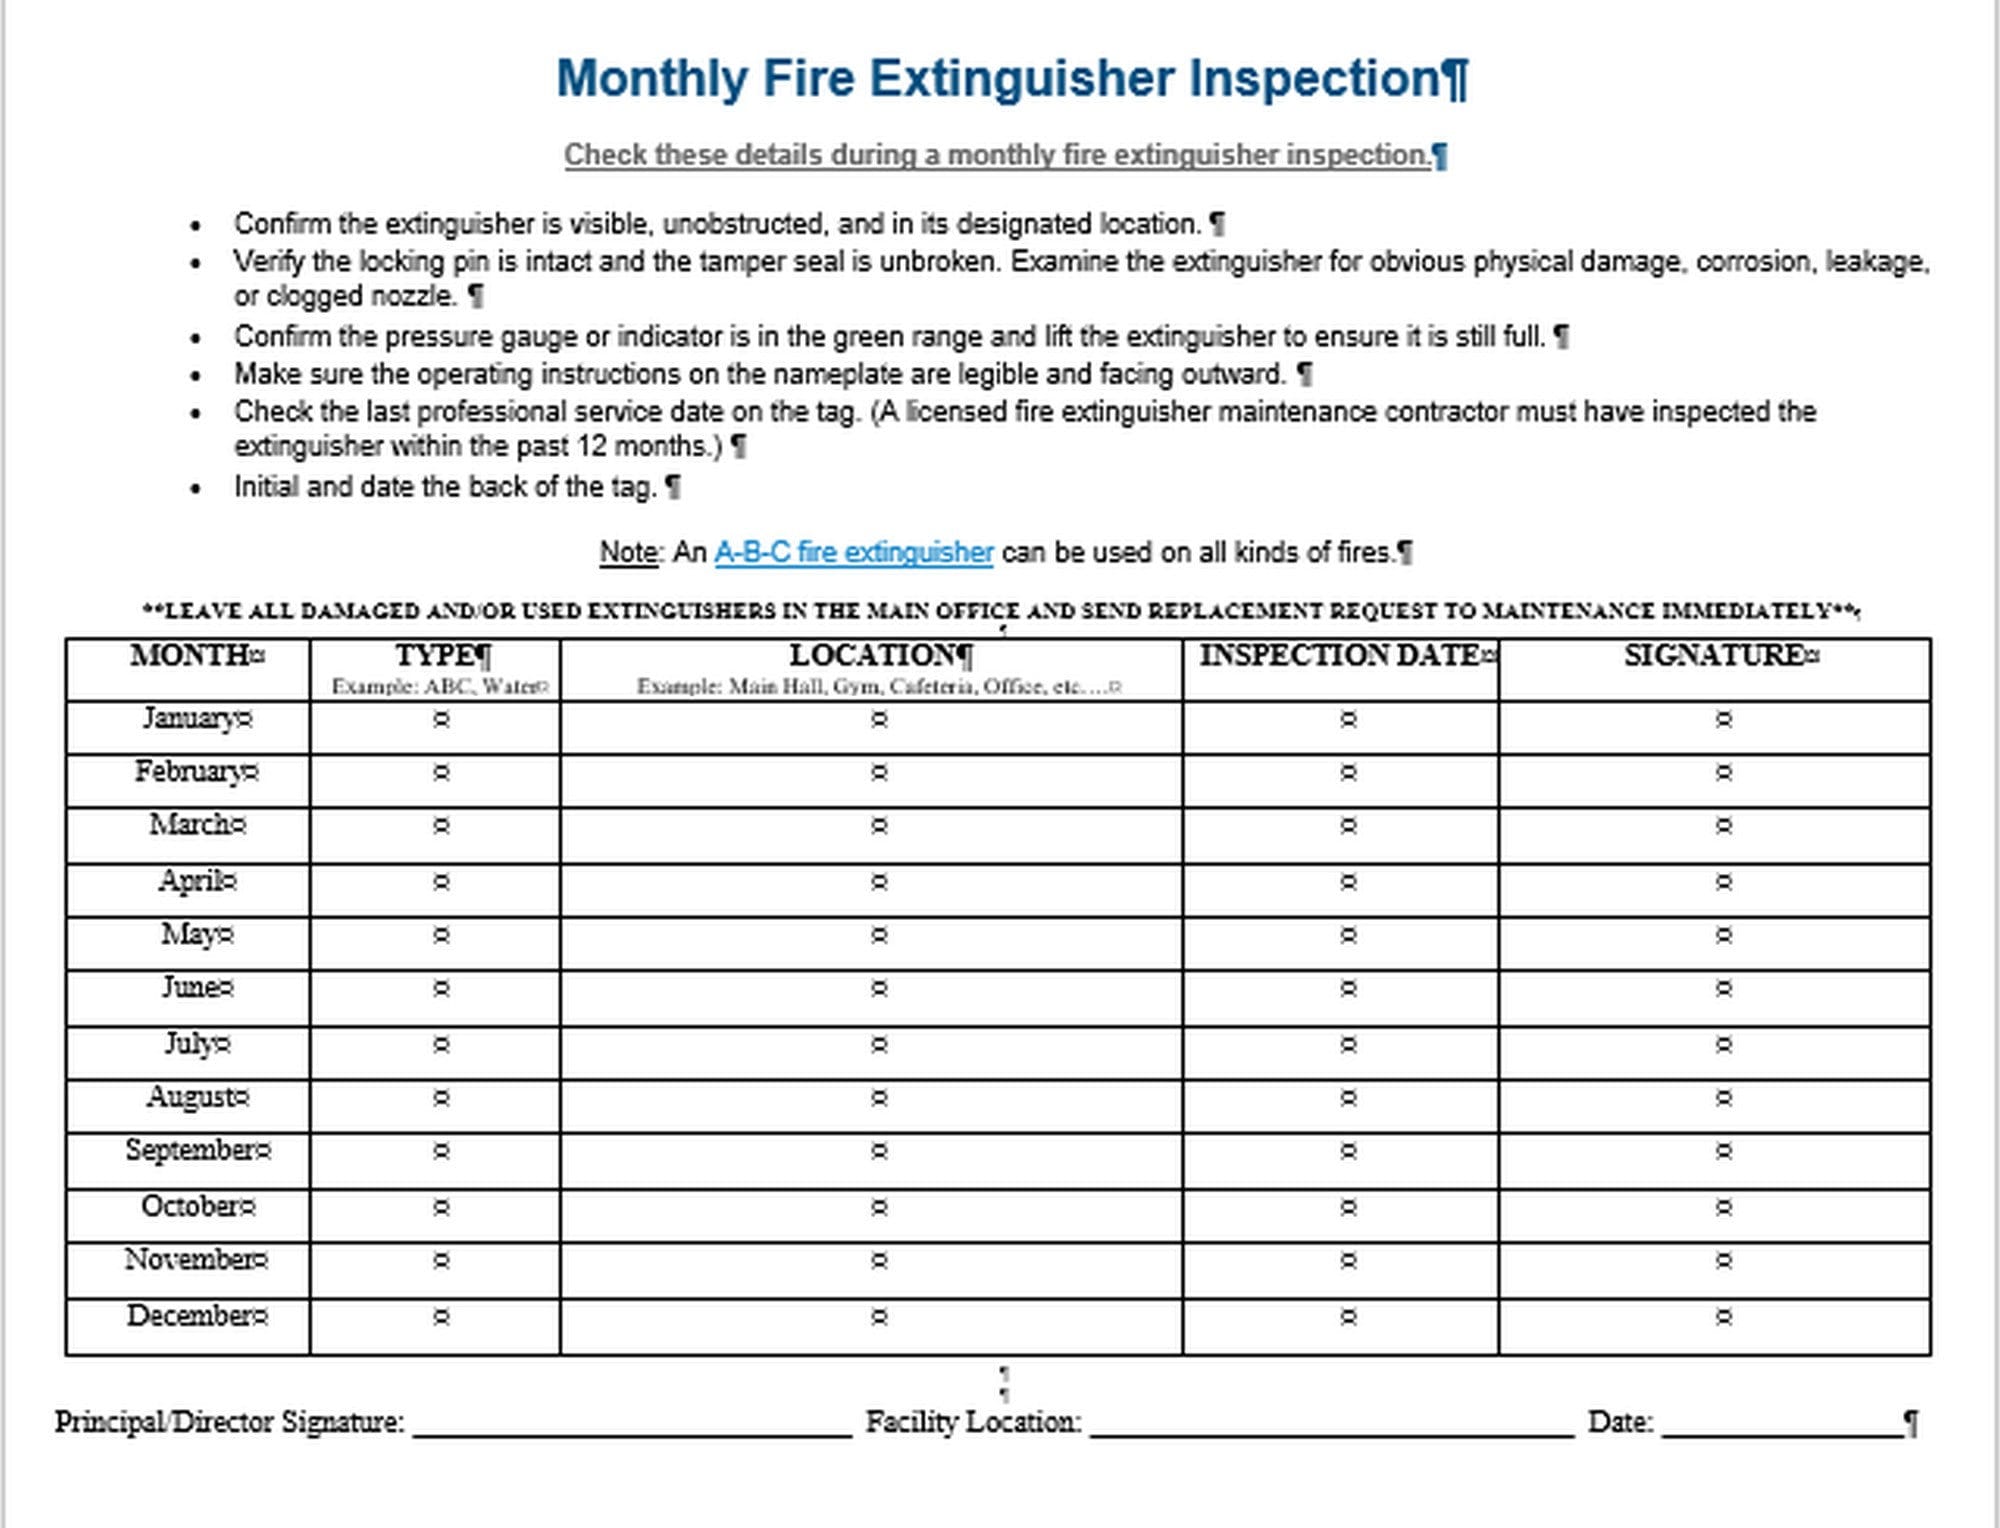 printable-monthly-fire-extinguisher-inspection-form-template-excel-printable-form-templates